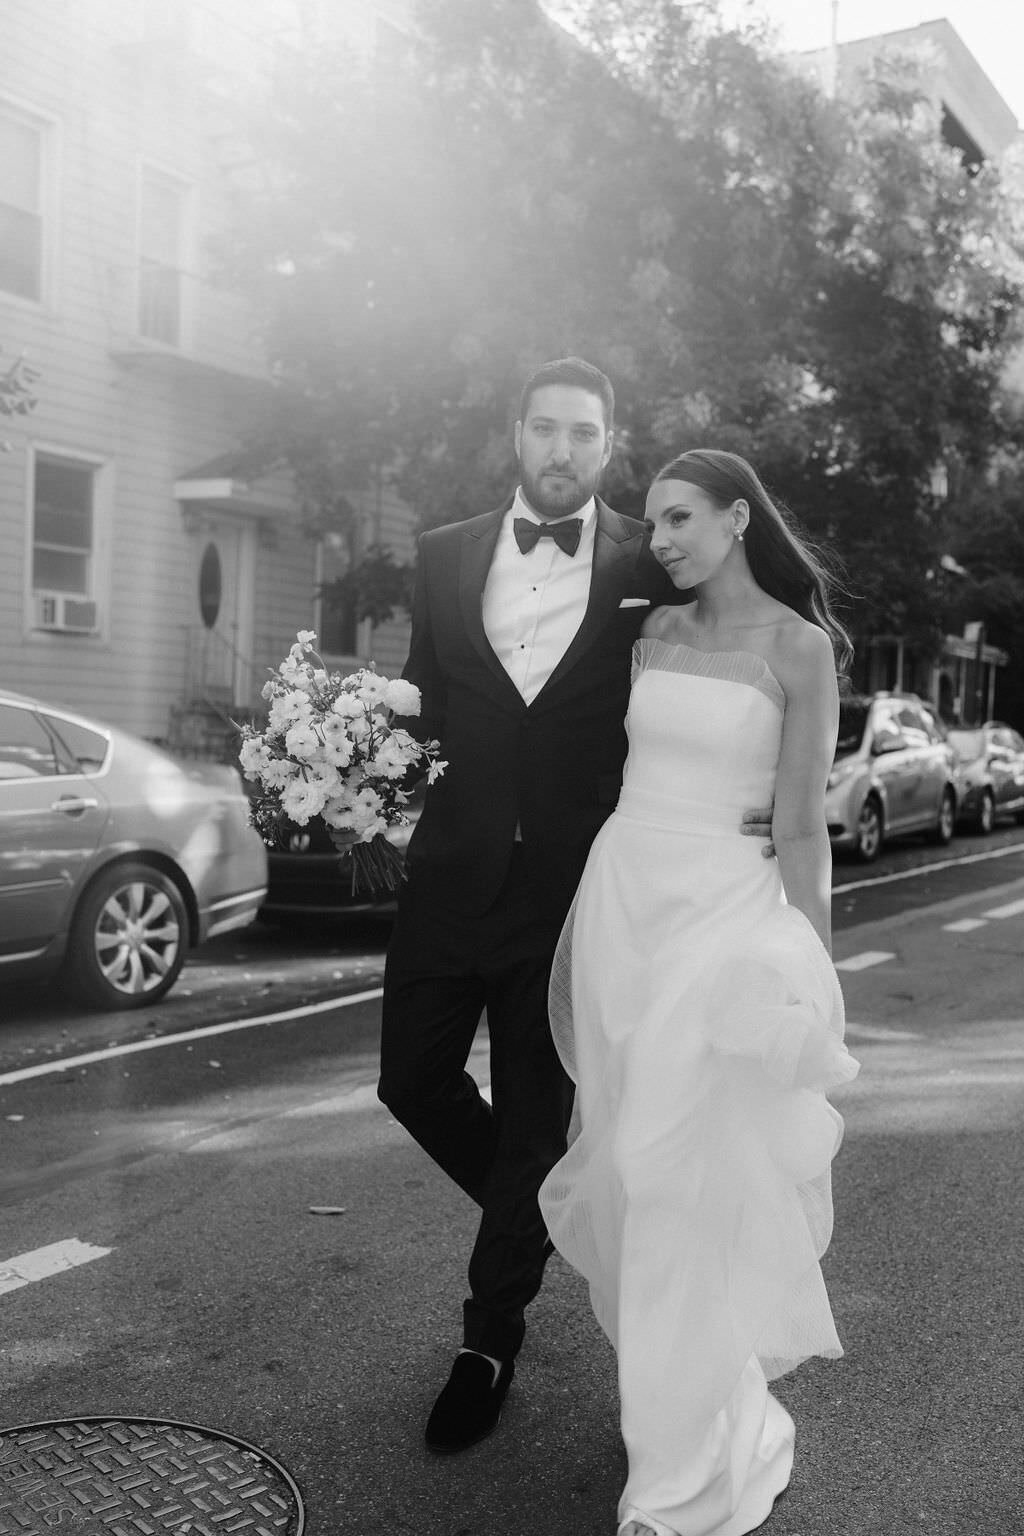 black and white photo of a groom holding bouquet with one hand while the other is wrapped around a bride as they walk down a street